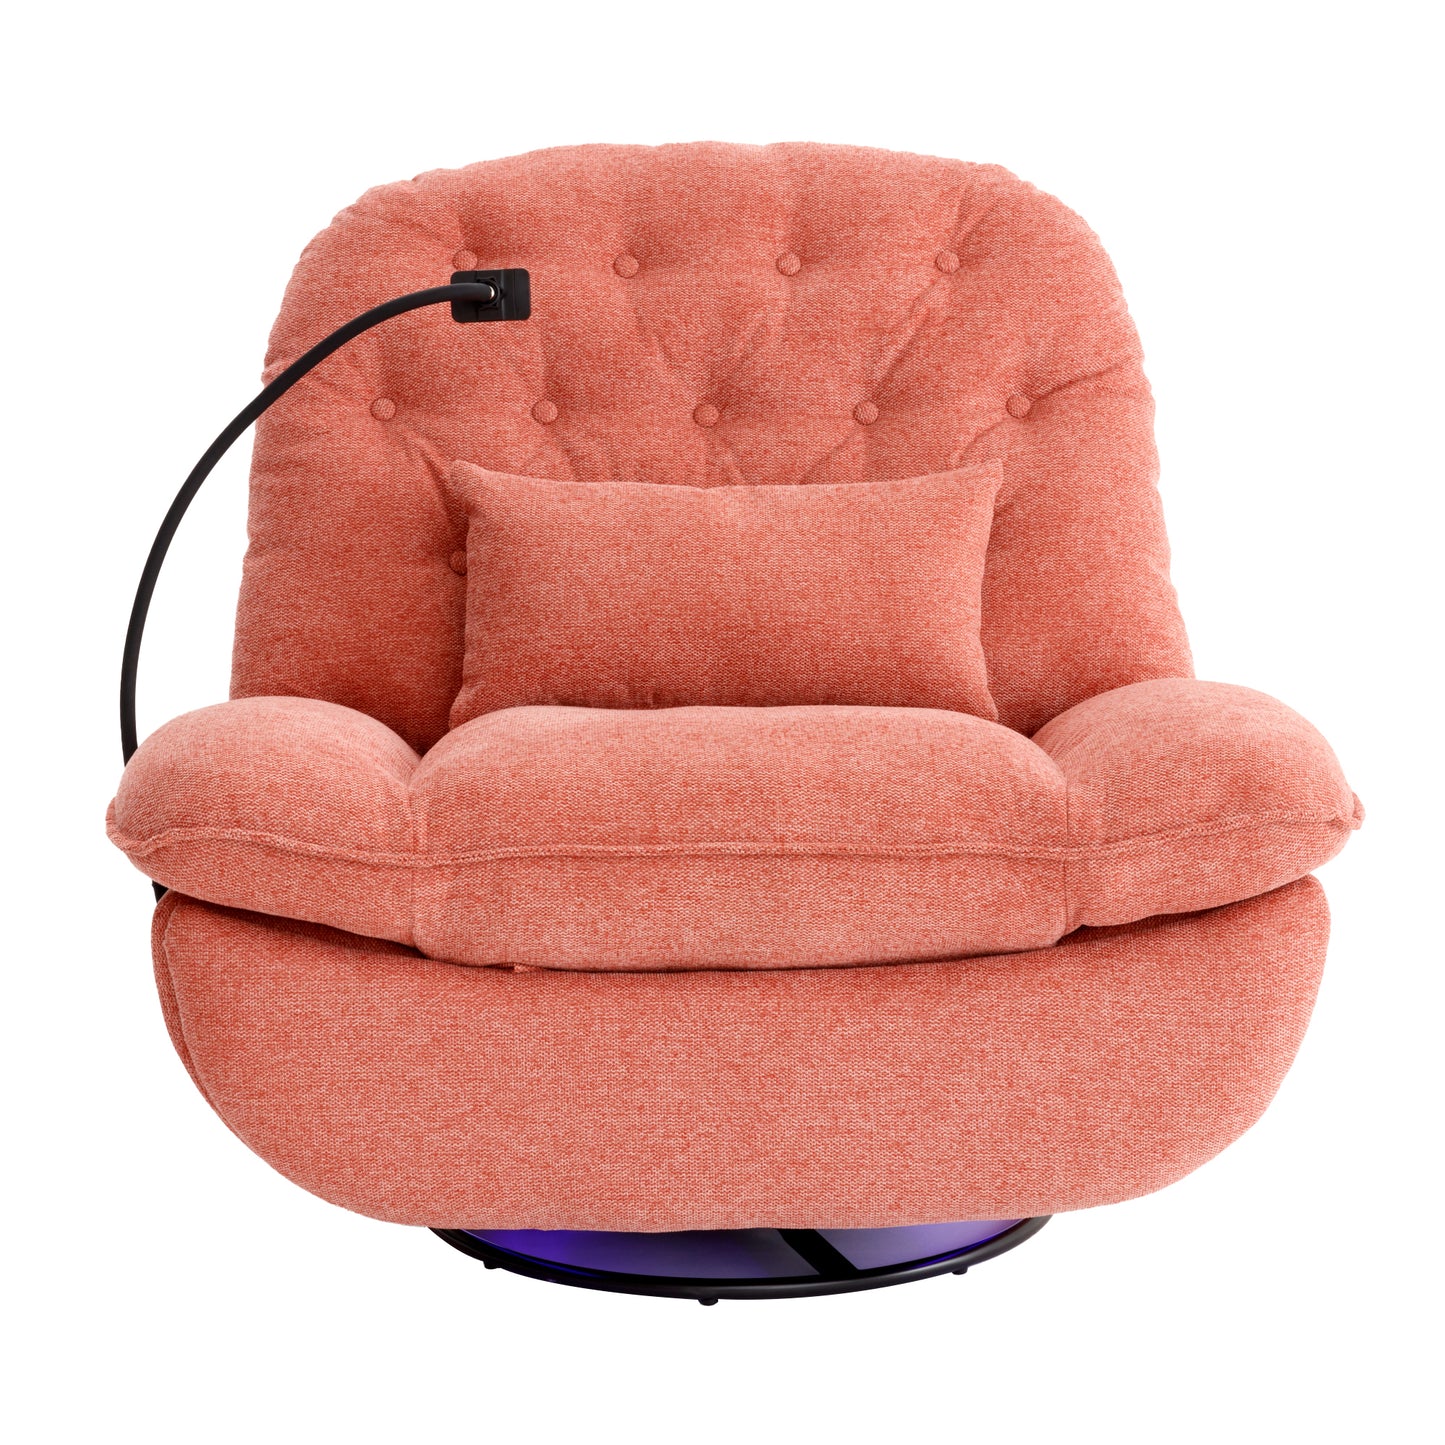 270 Degree Swivel Power Recliner with Voice Control, Bluetooth Music Player,USB Ports, Atmosphere Lamp, Hidden Arm Storage and Mobile Phone Holder for Living Room, Bedroom, Apartment, Red